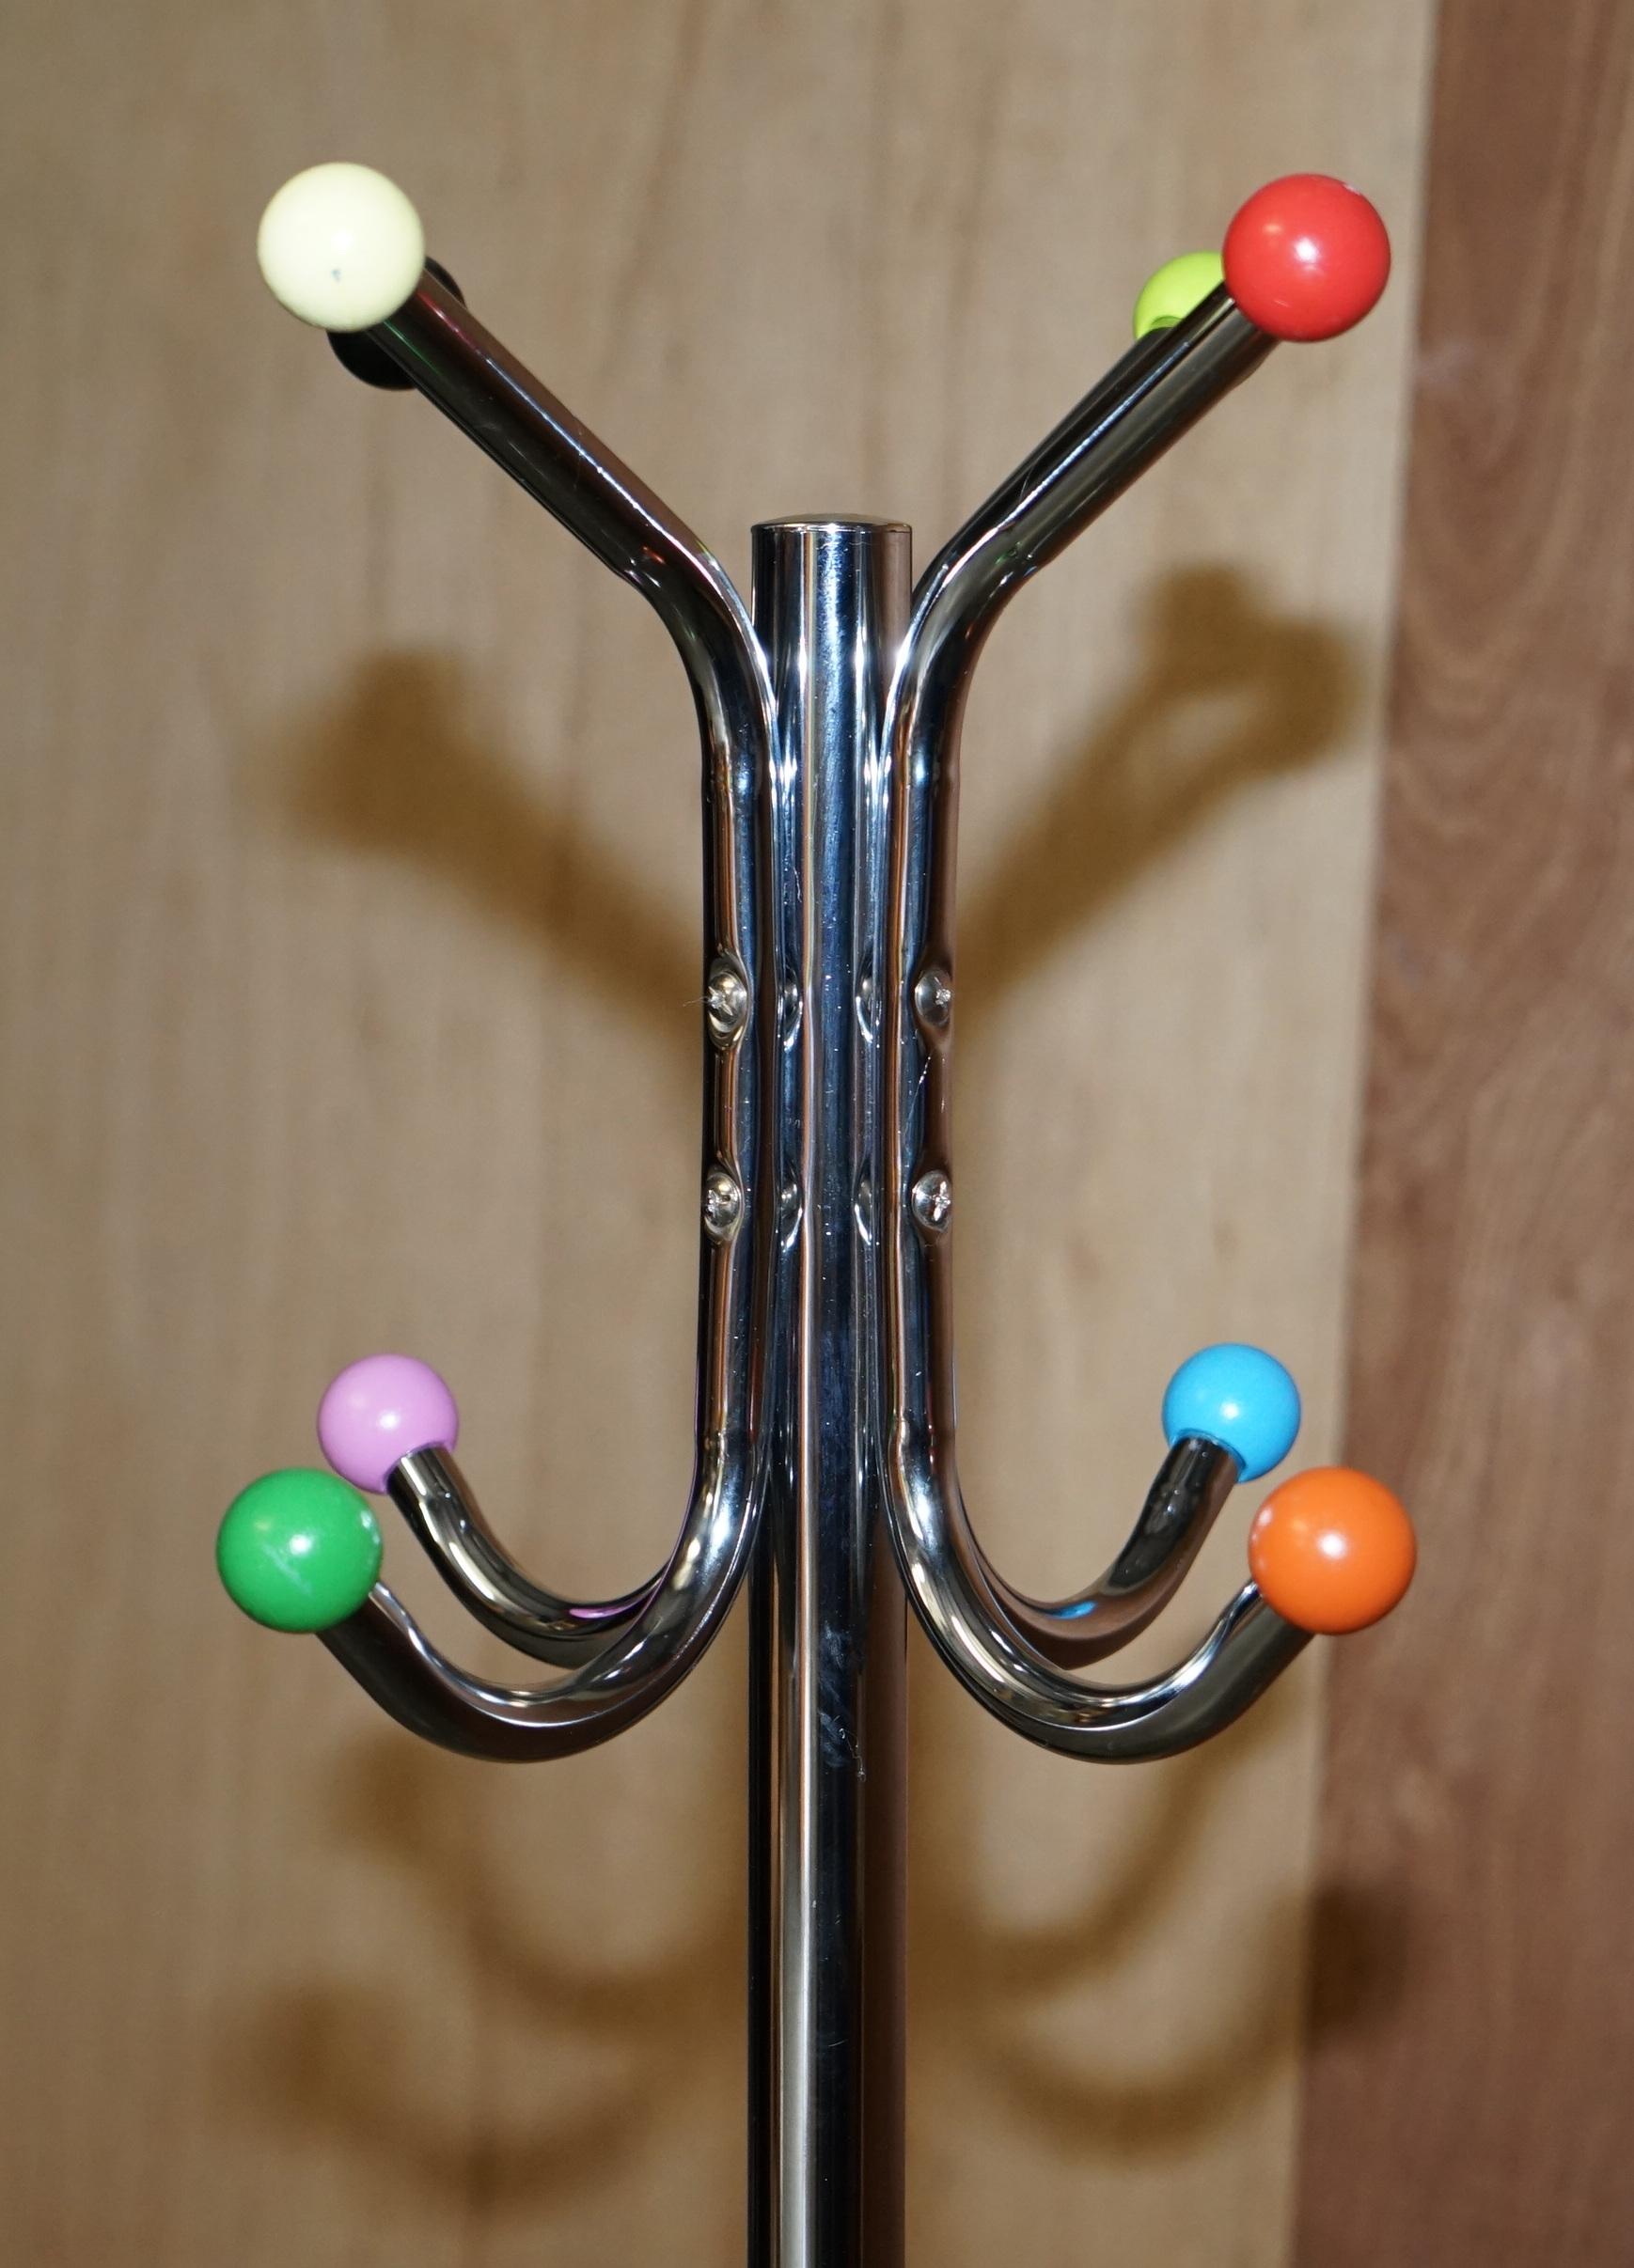 Hand-Crafted Lovely Vintage Style Chromed Atomic Coat Rack Floor Standing Very Cool & Retro